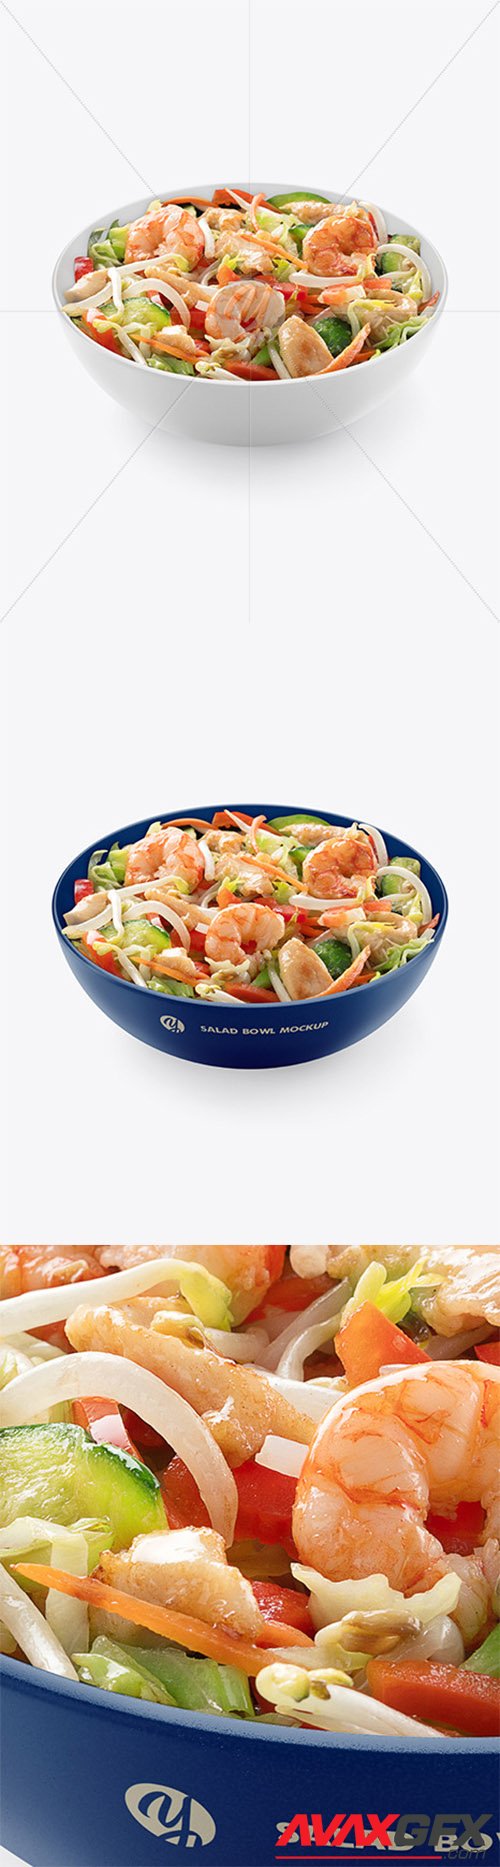 Download Salad W Shrimps In A Bowl Mockup 60725 Avaxgfx All Downloads That You Need In One Place Graphic From Nitroflare Rapidgator Yellowimages Mockups